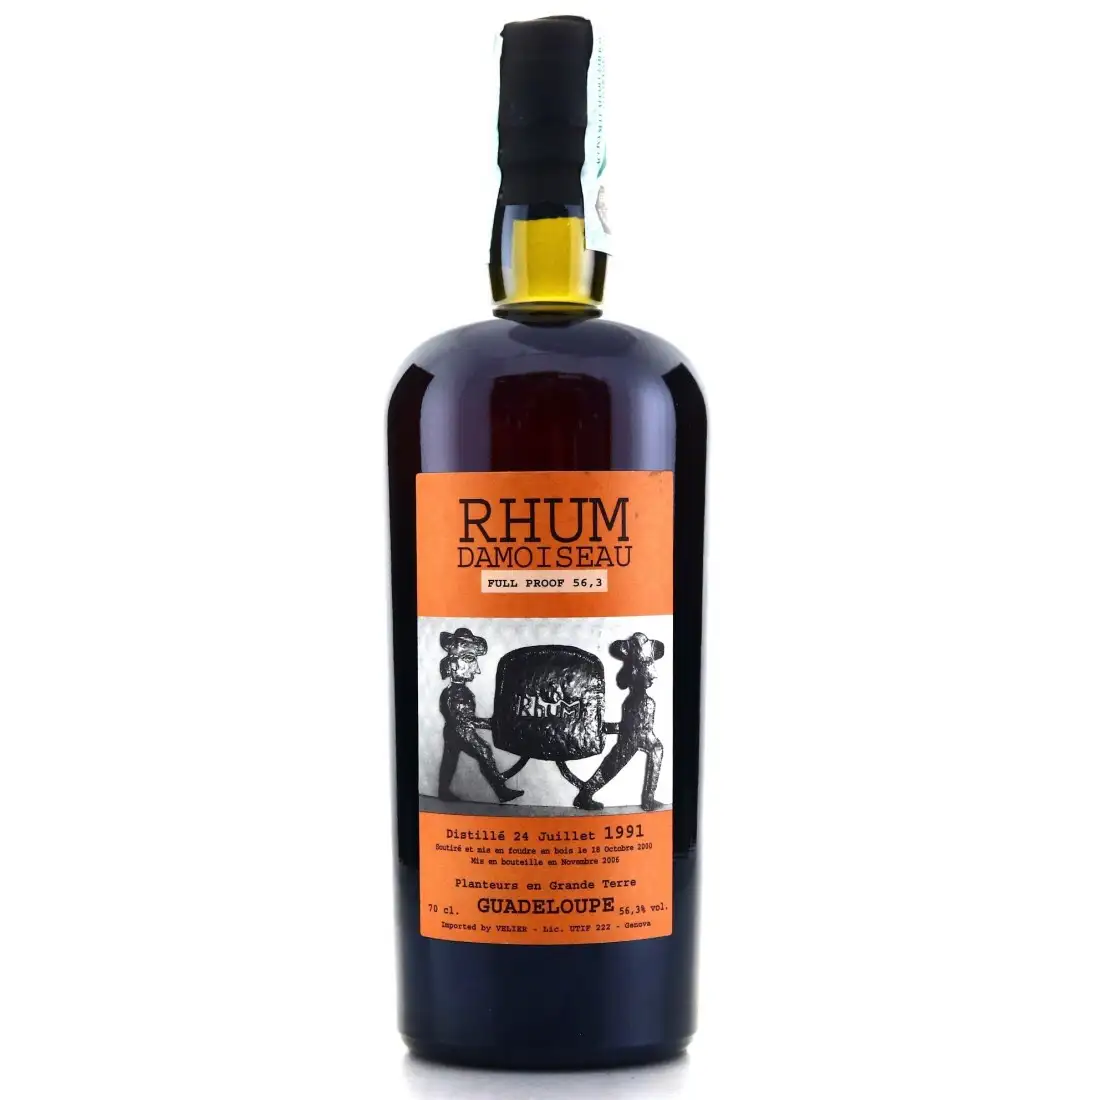 Image of the front of the bottle of the rum 1991